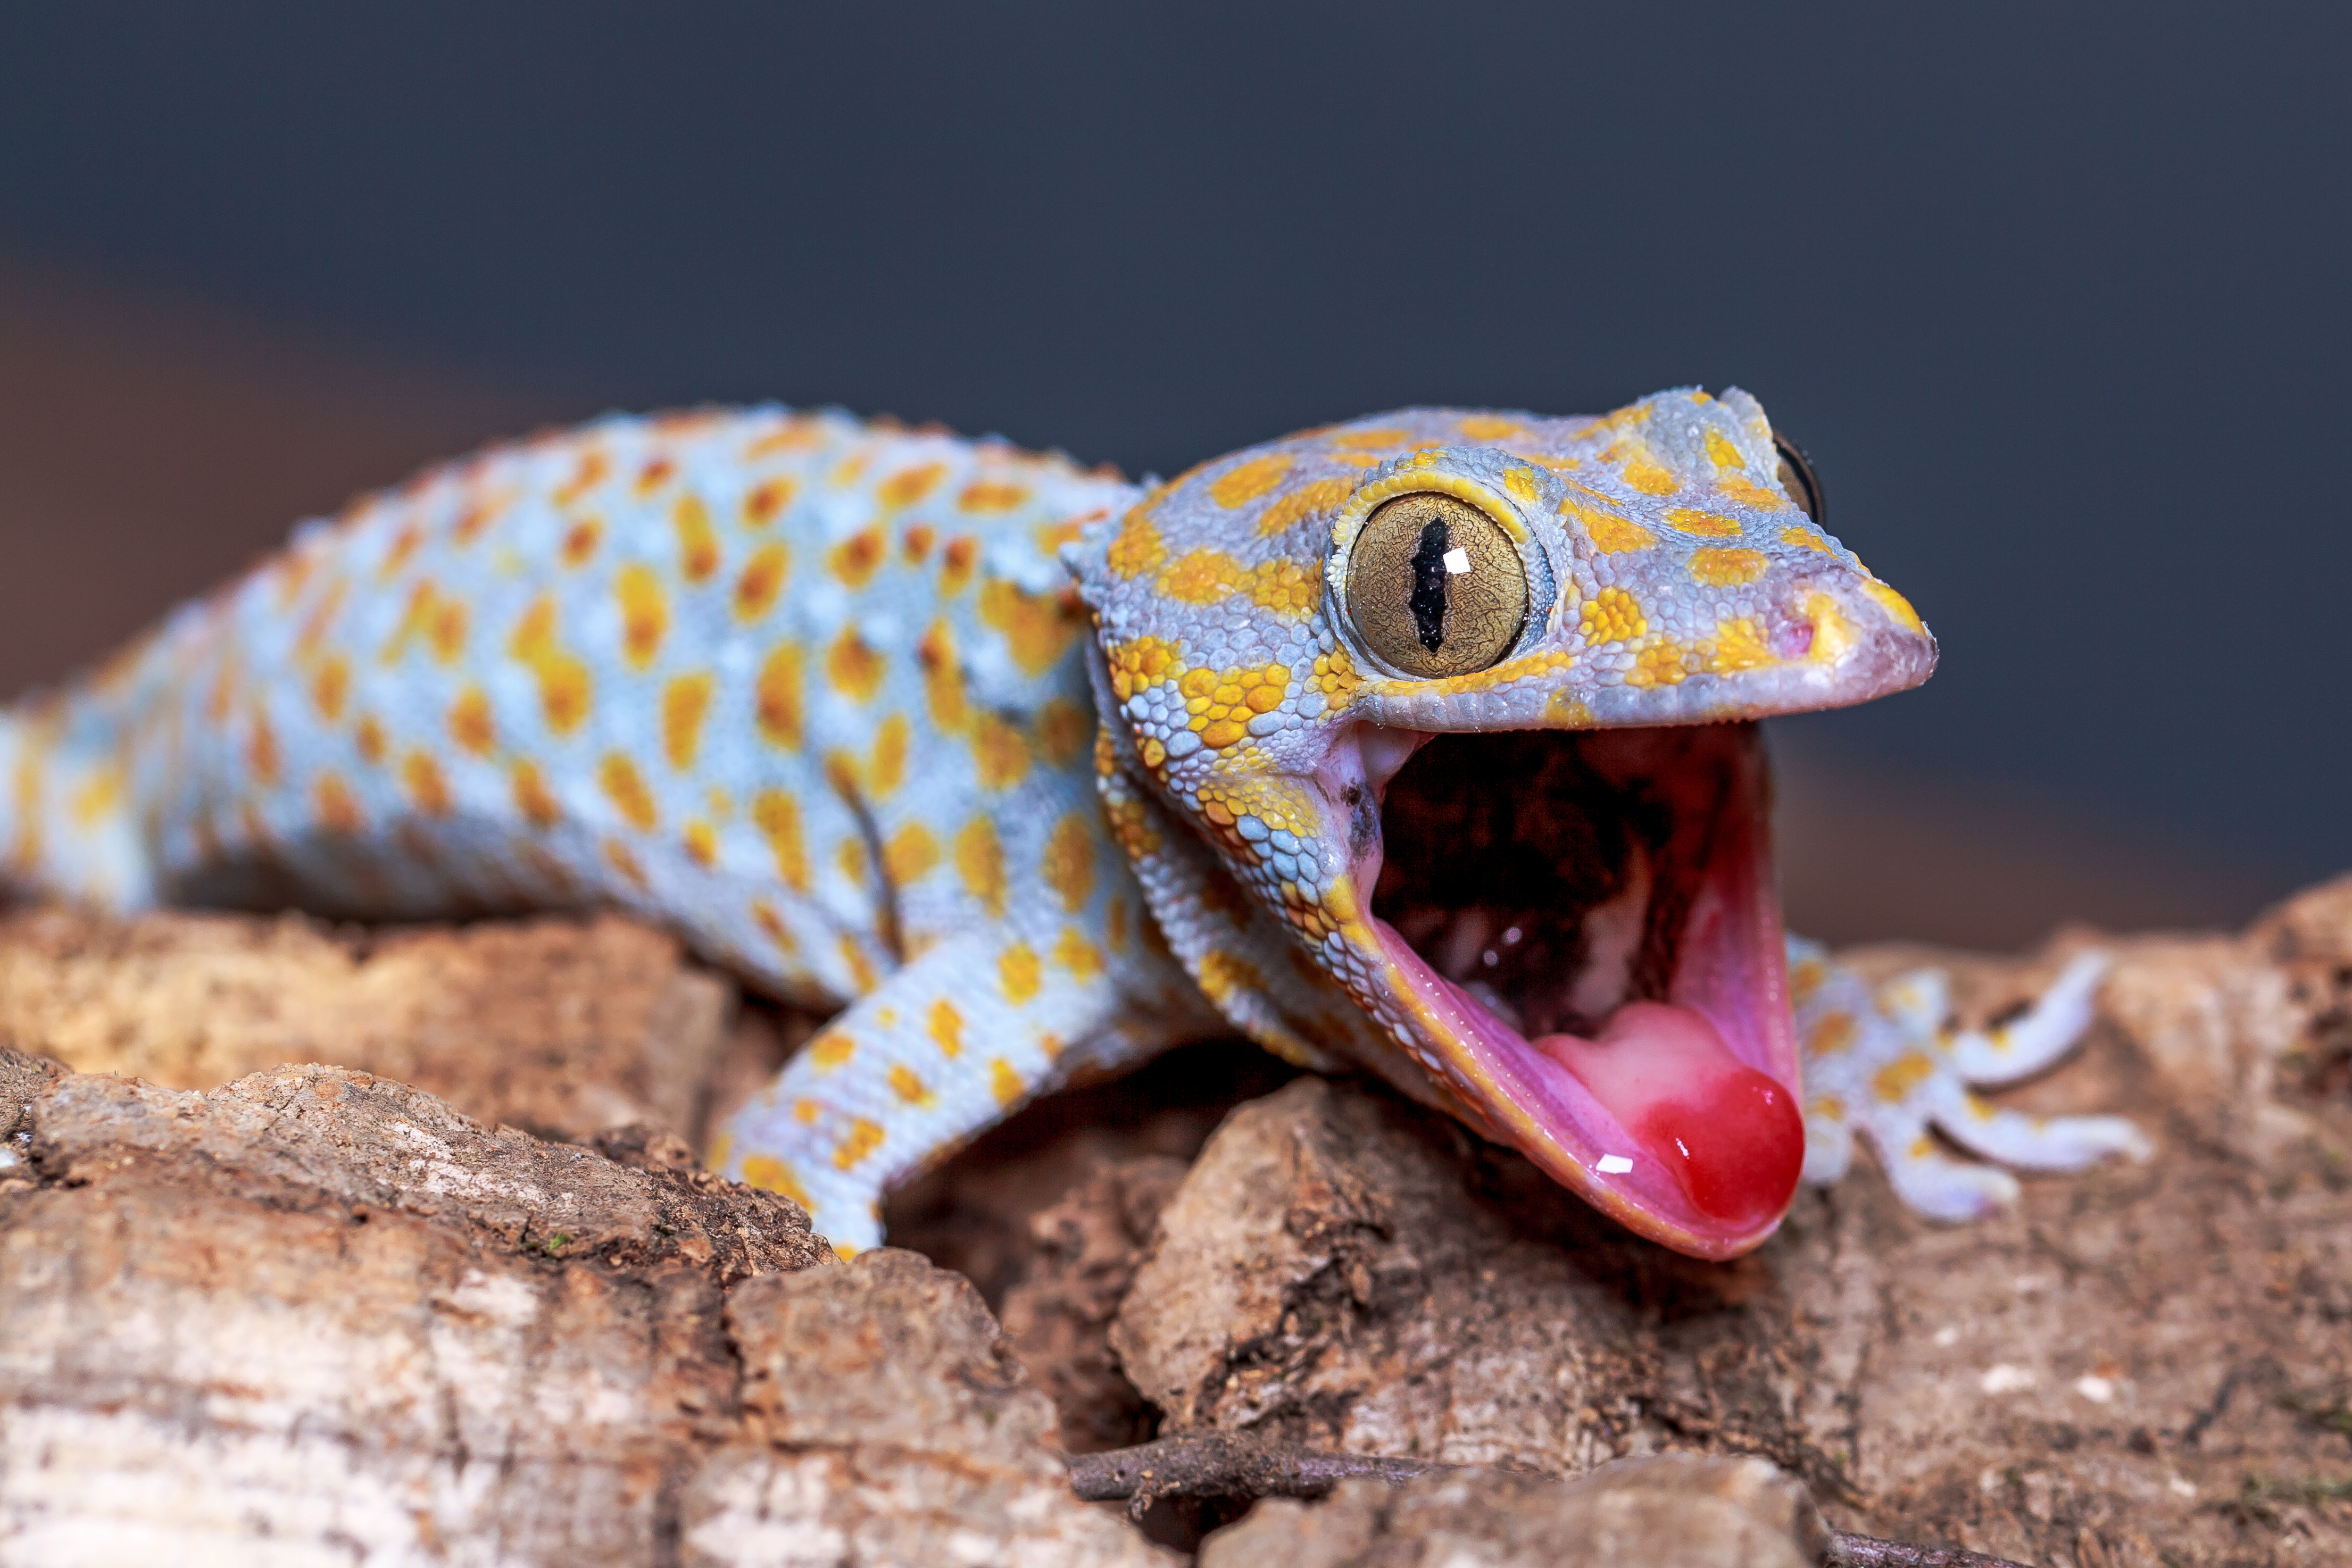 Pupil enables clear vision in extreme light conditions : Tokay Gecko ...